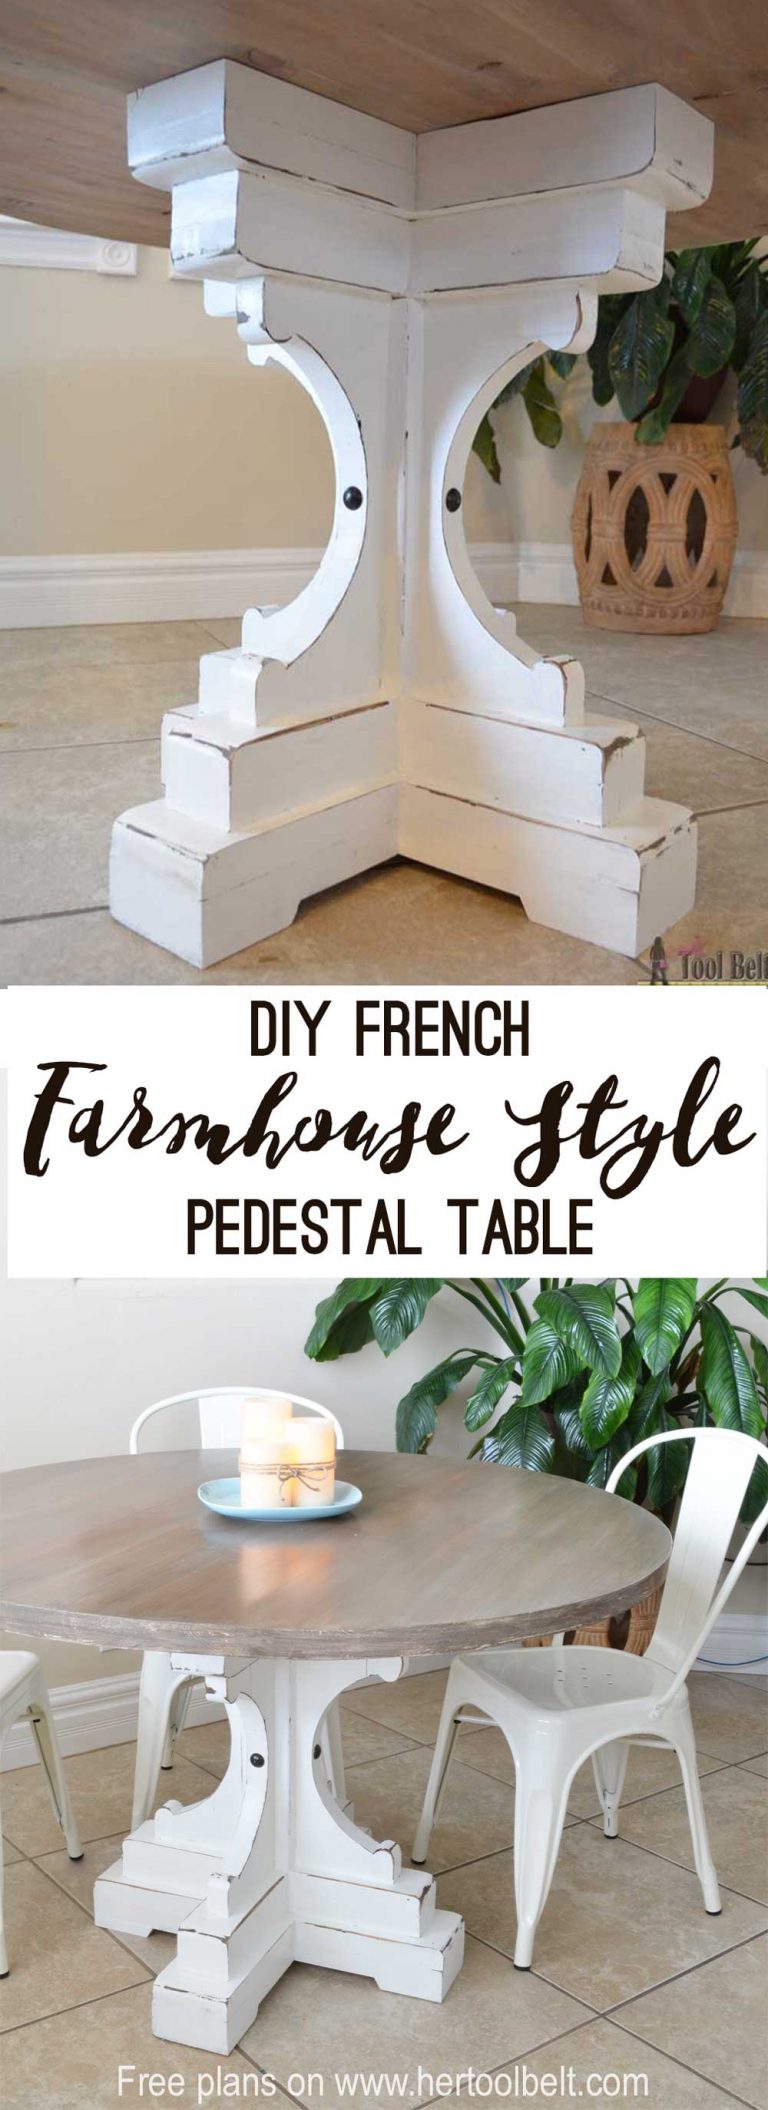 DIY Farm Table Build Plans and Makeover Ideas to add Farmhouse Style to Your Home